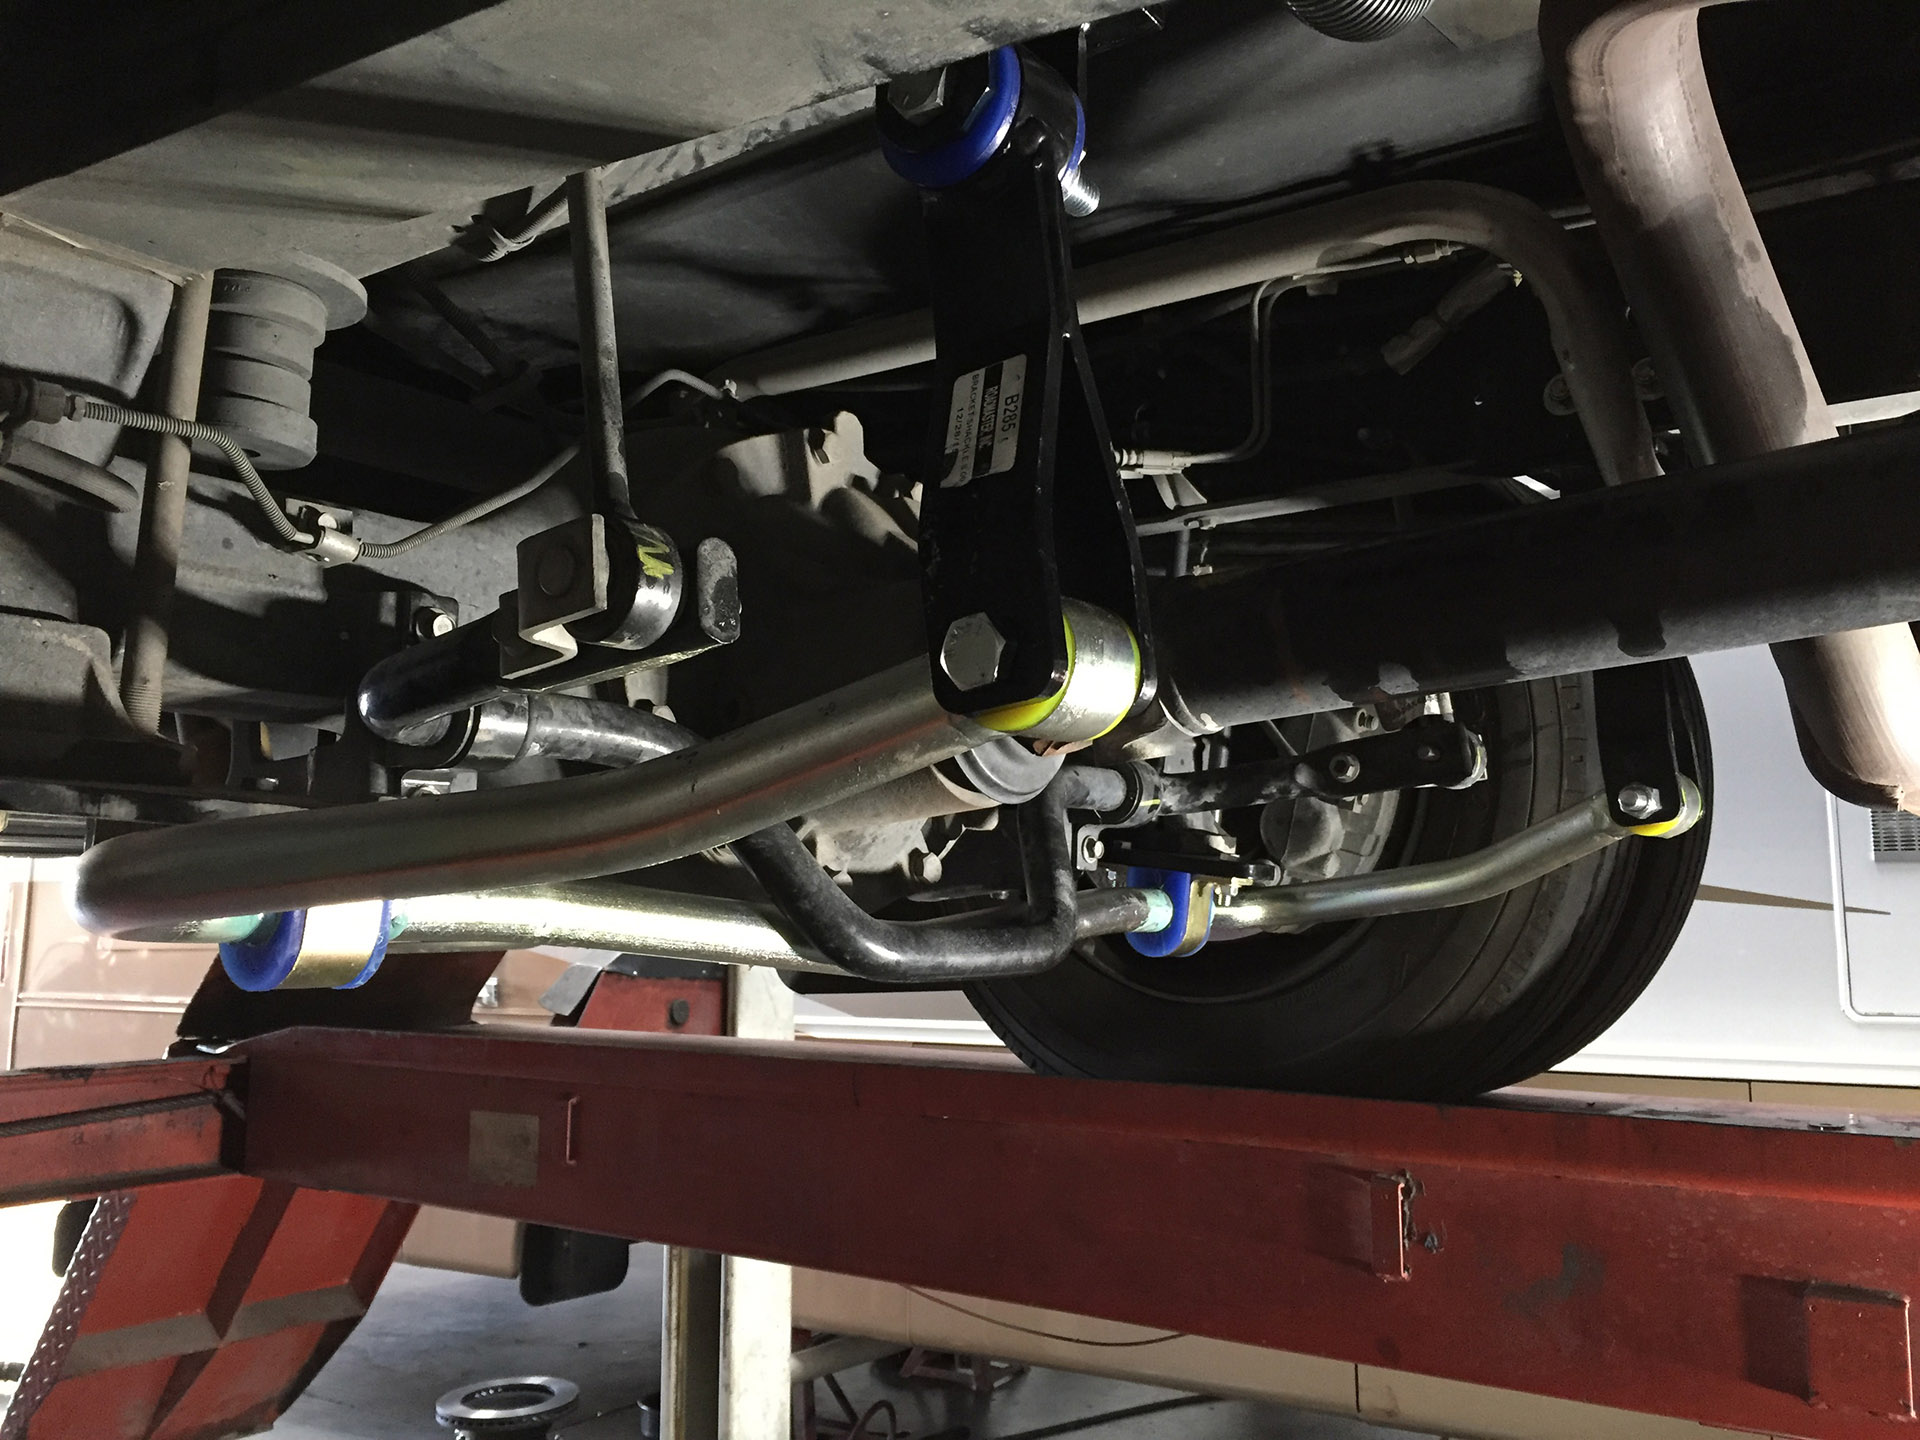 The rear Anti-Sway bar installed